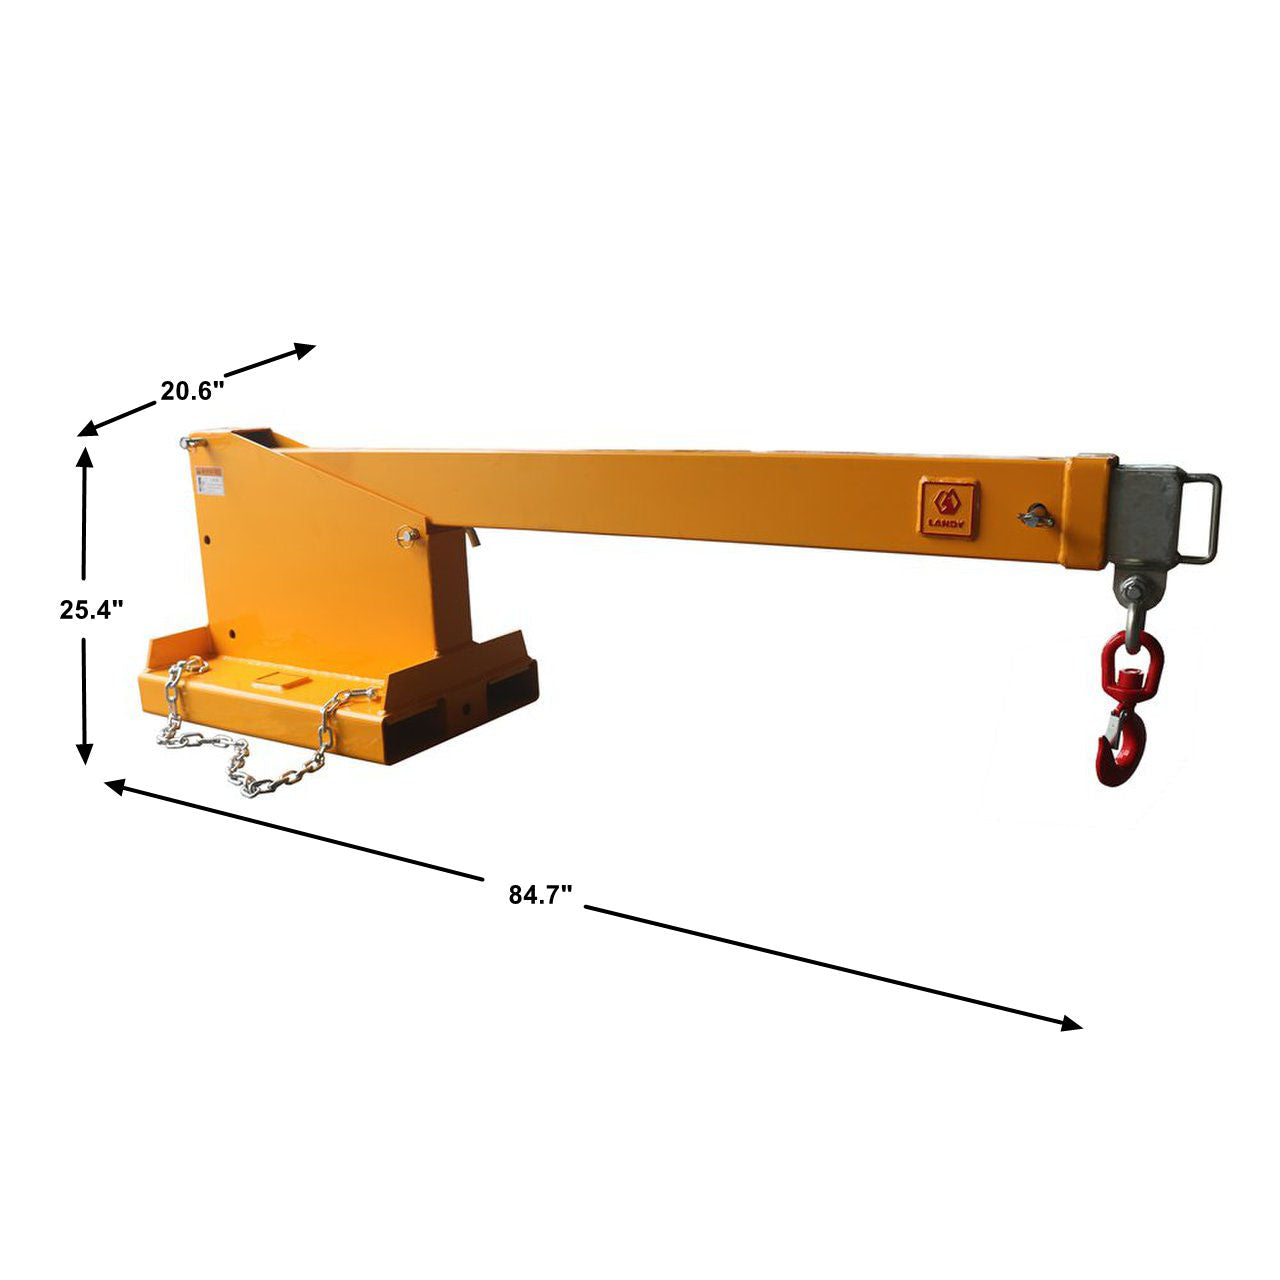 Landy Attachments Fork Mounted Telescoping Crane Jib Boom, Forklift Jib Boom Crane, Forklift Mobile Crane, Forklift Boom Attachment - 0